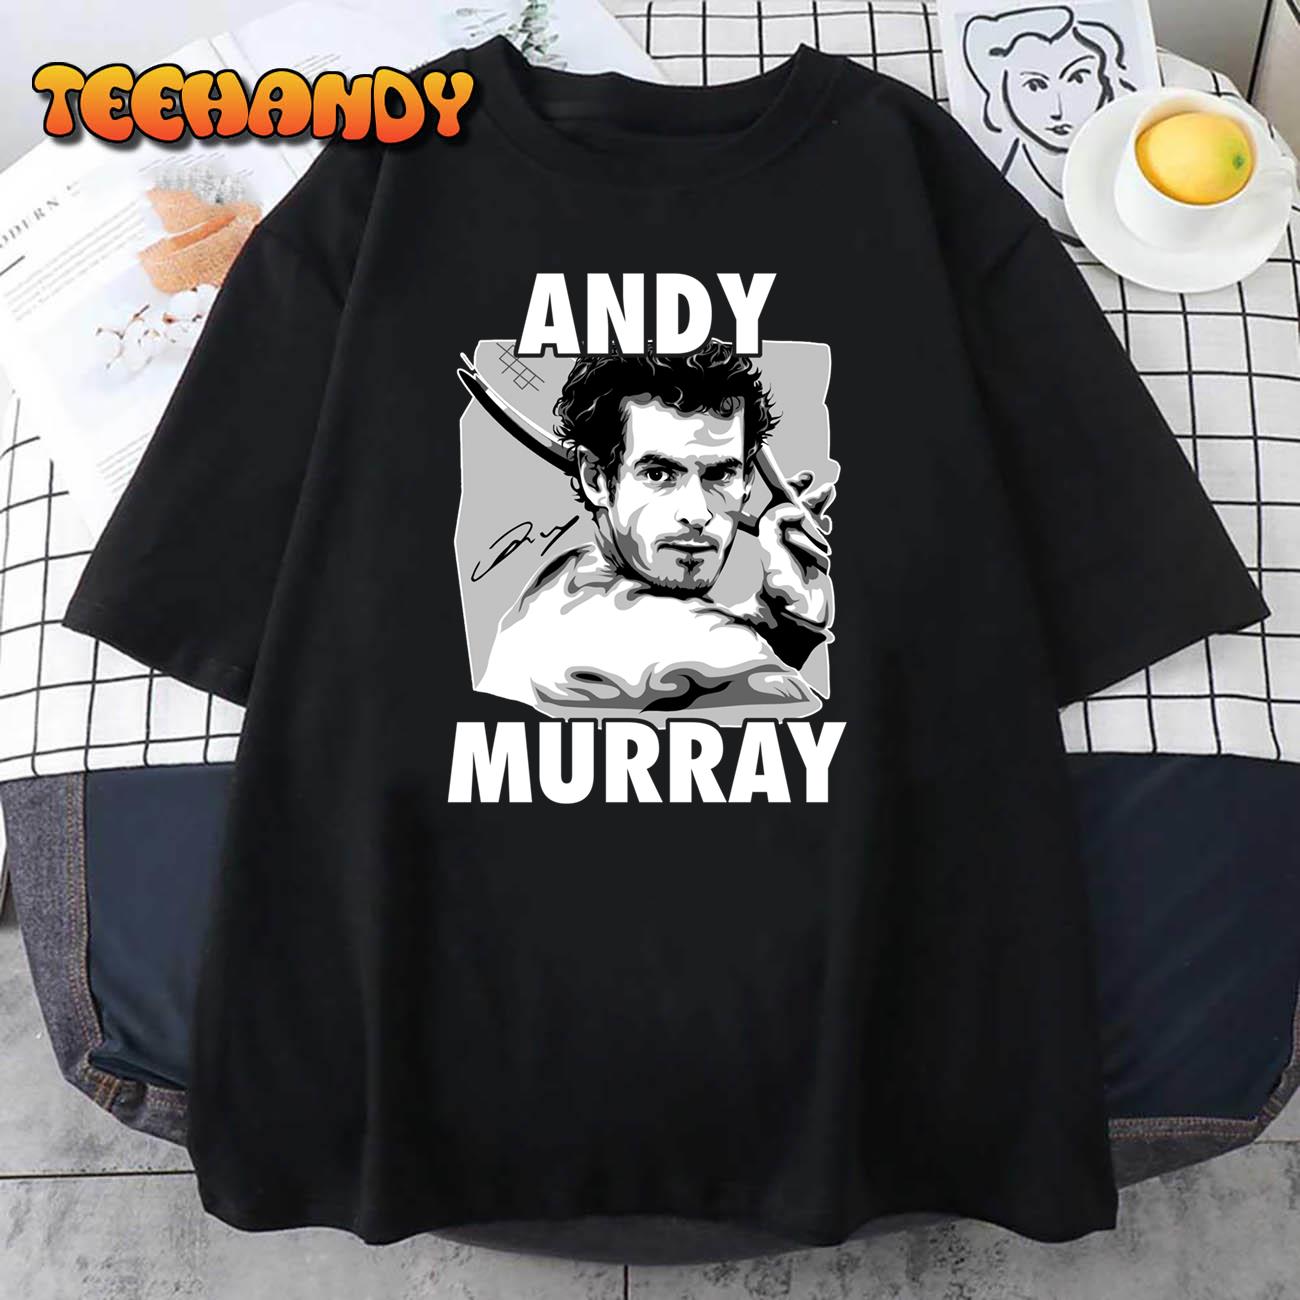 Andy Murray Vintage Unisex T-shirt